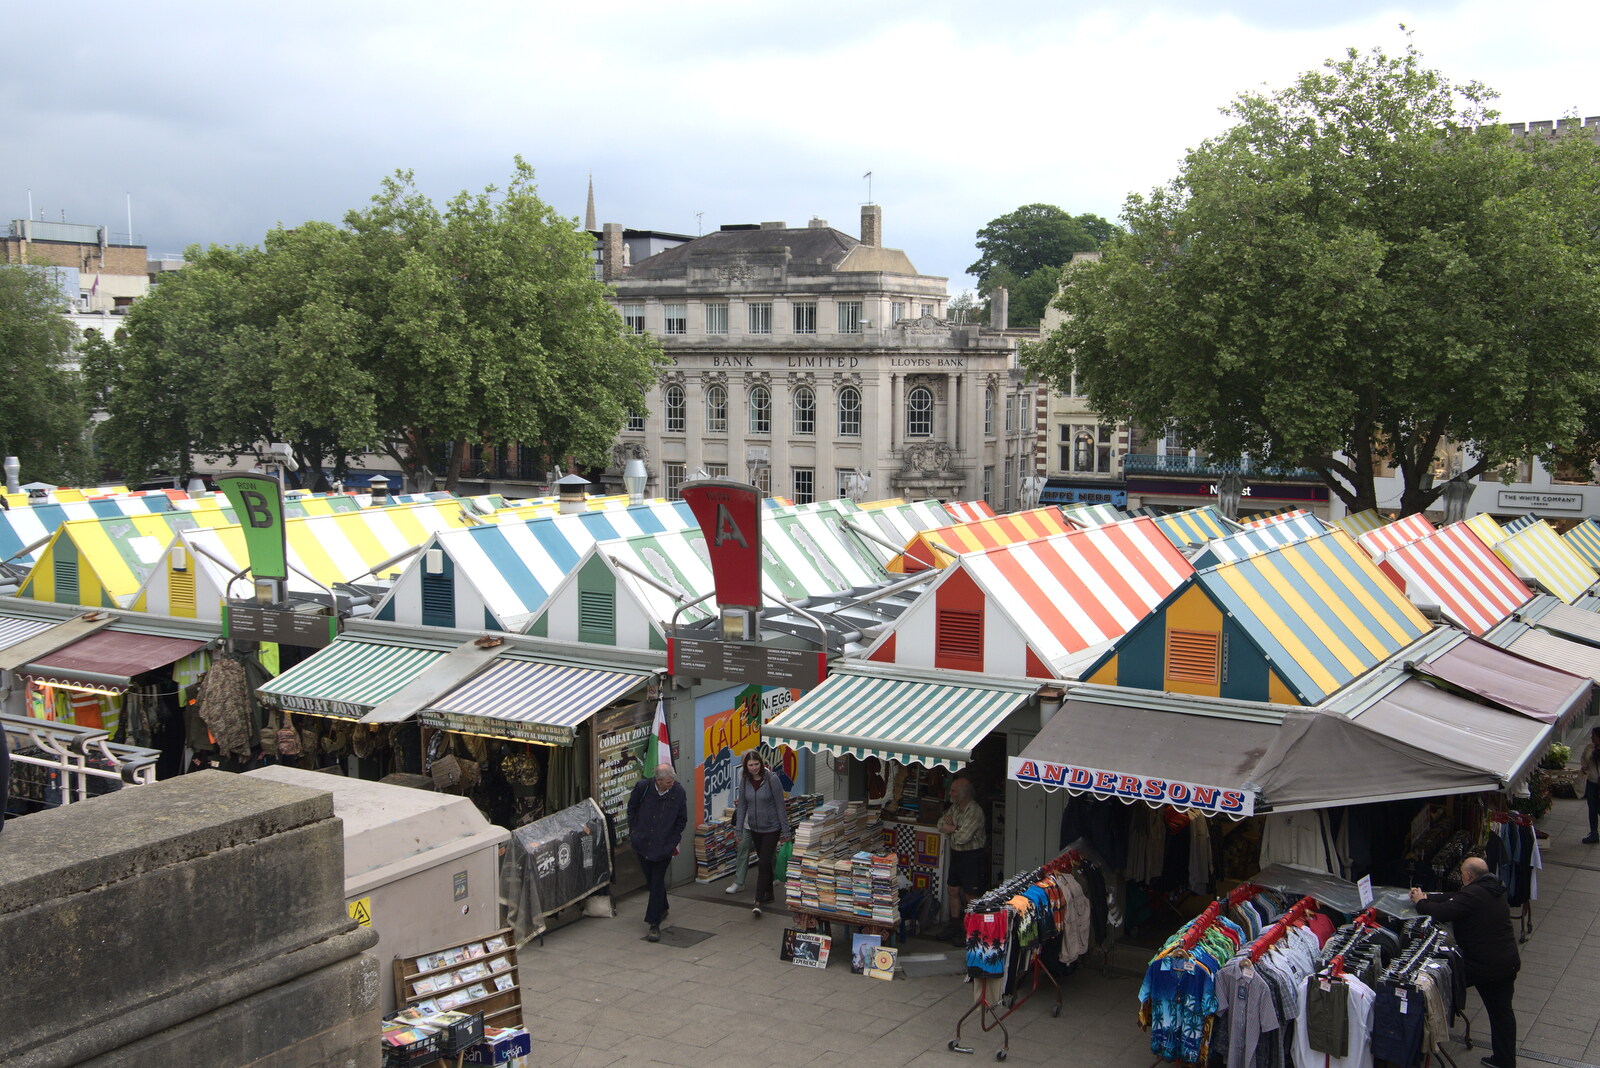 Looking over Norwich's outdoor market from Discovering the Hidden City: Norwich, Norfolk - 23rd May 2022